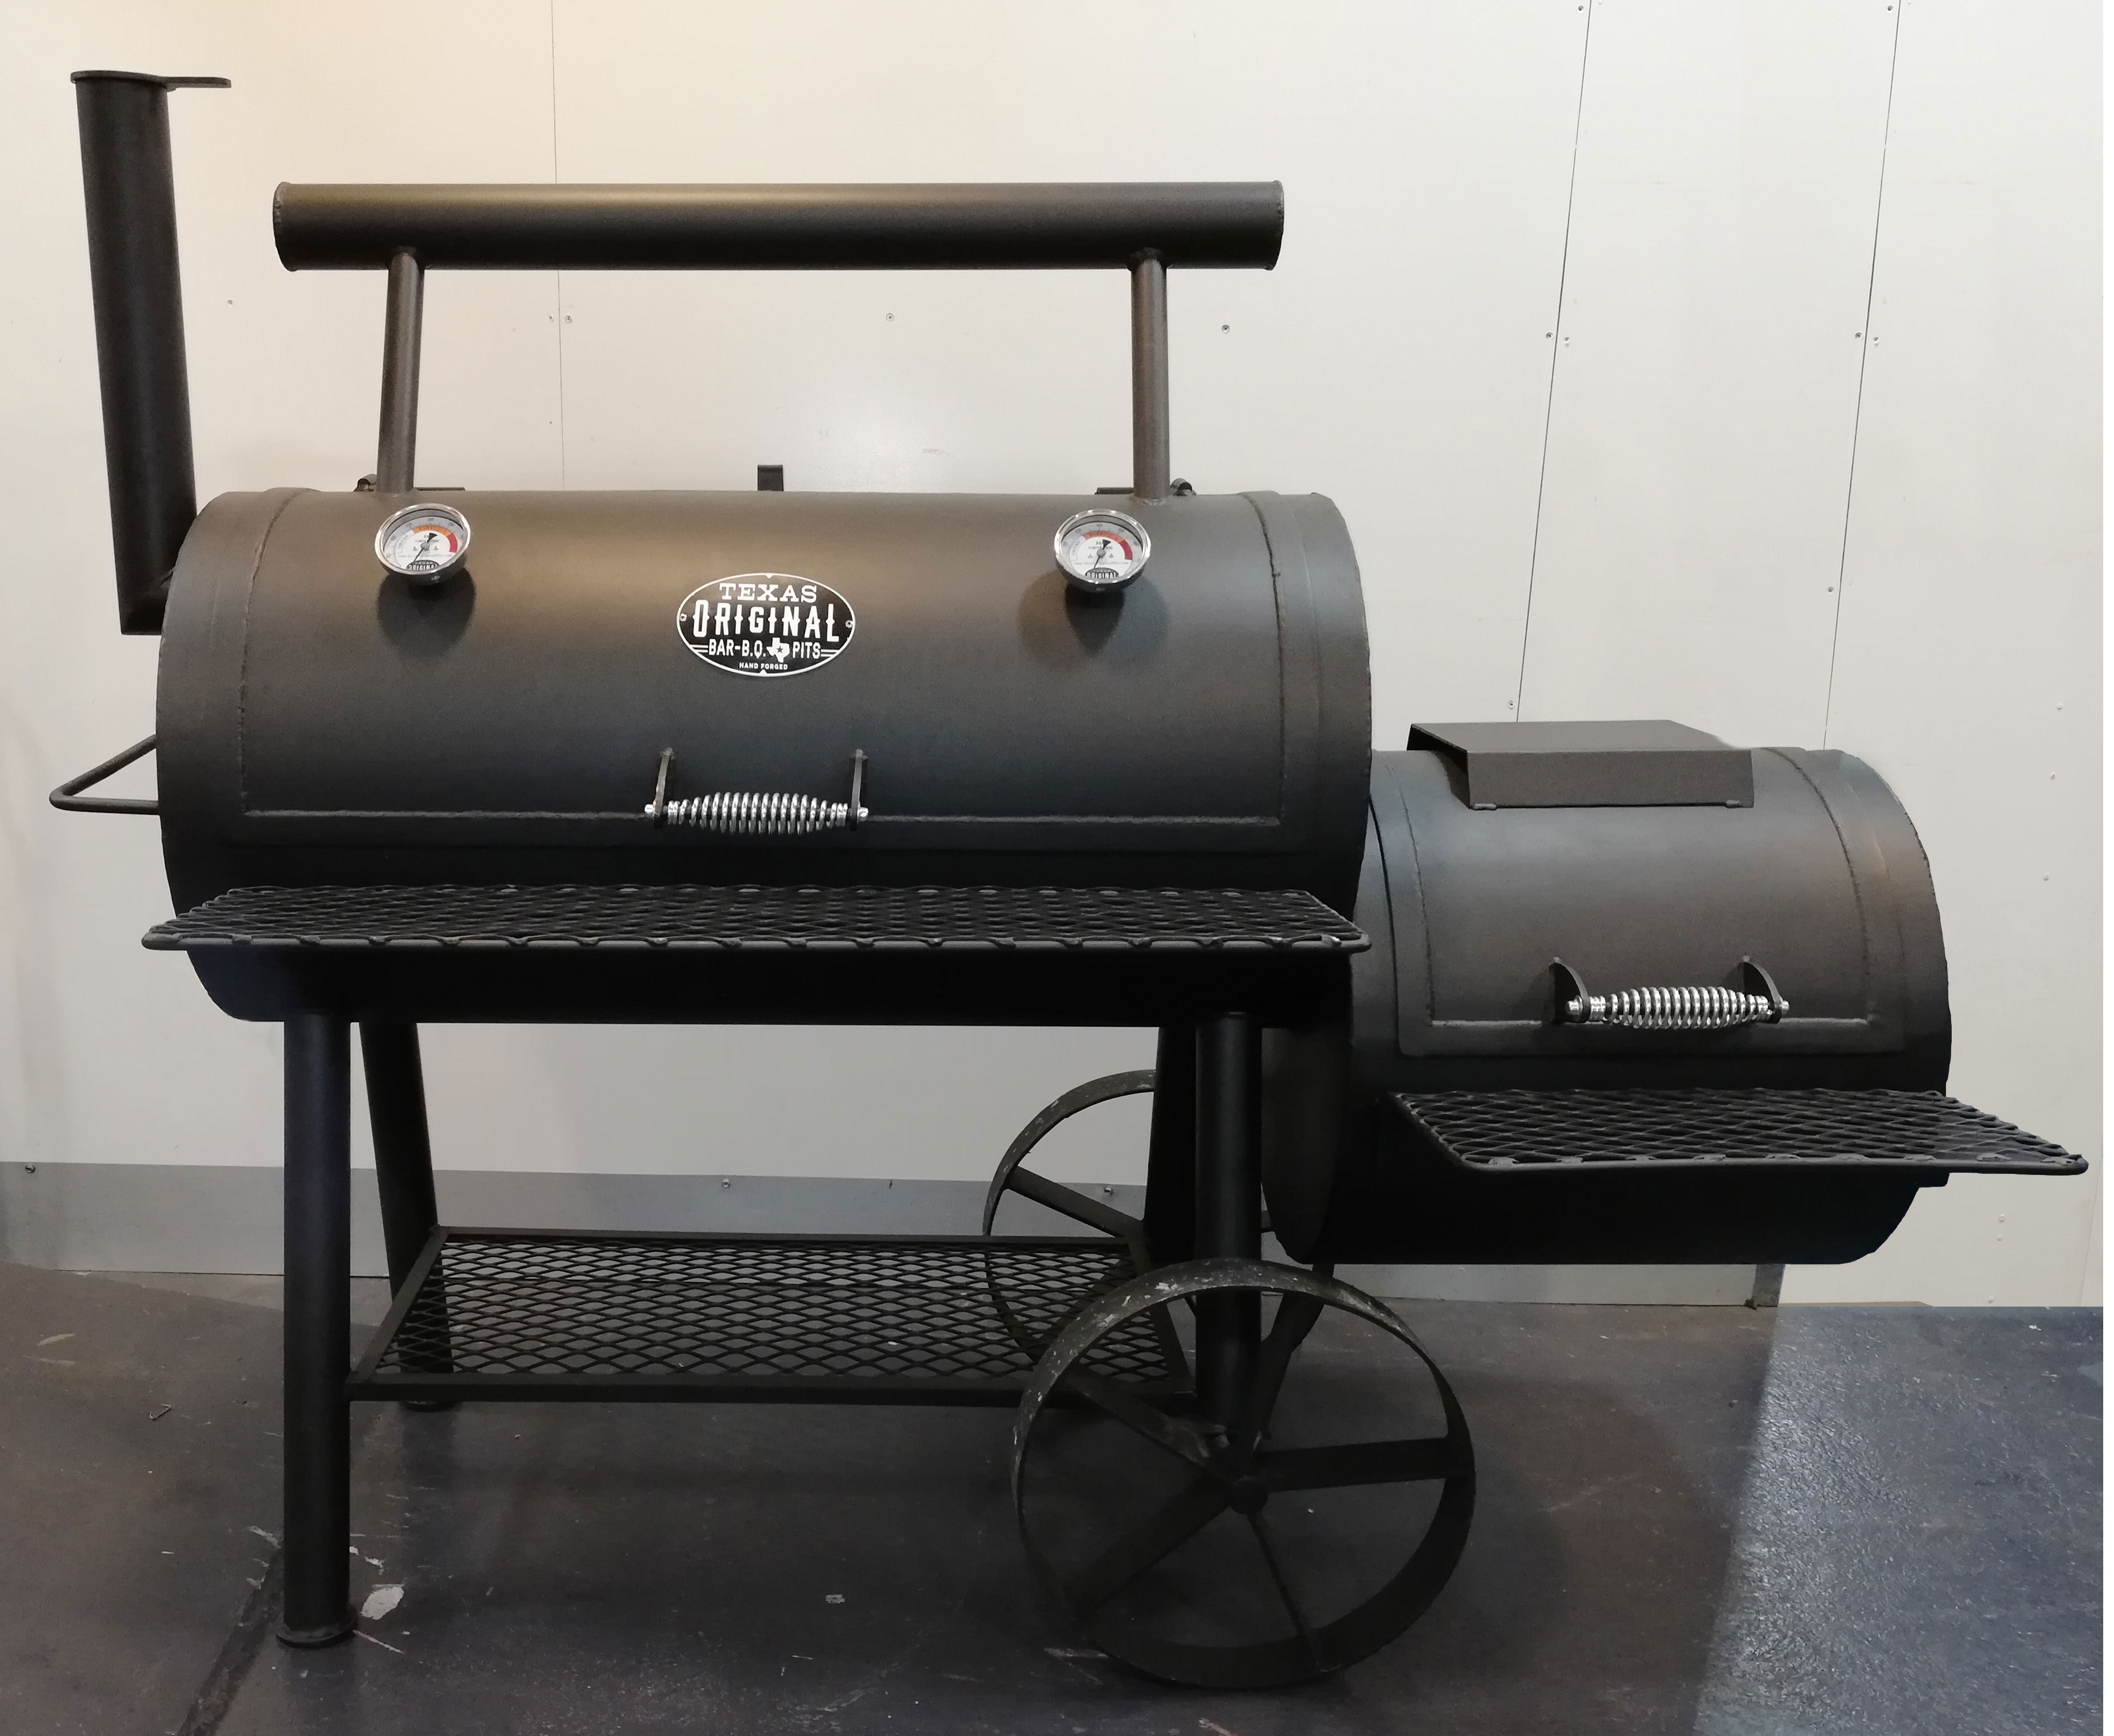 Luling Offset Smoker Single Door With Counter Weight 20 X 40 Grill With 20 Firebox Texas Original Pits Texas Direct